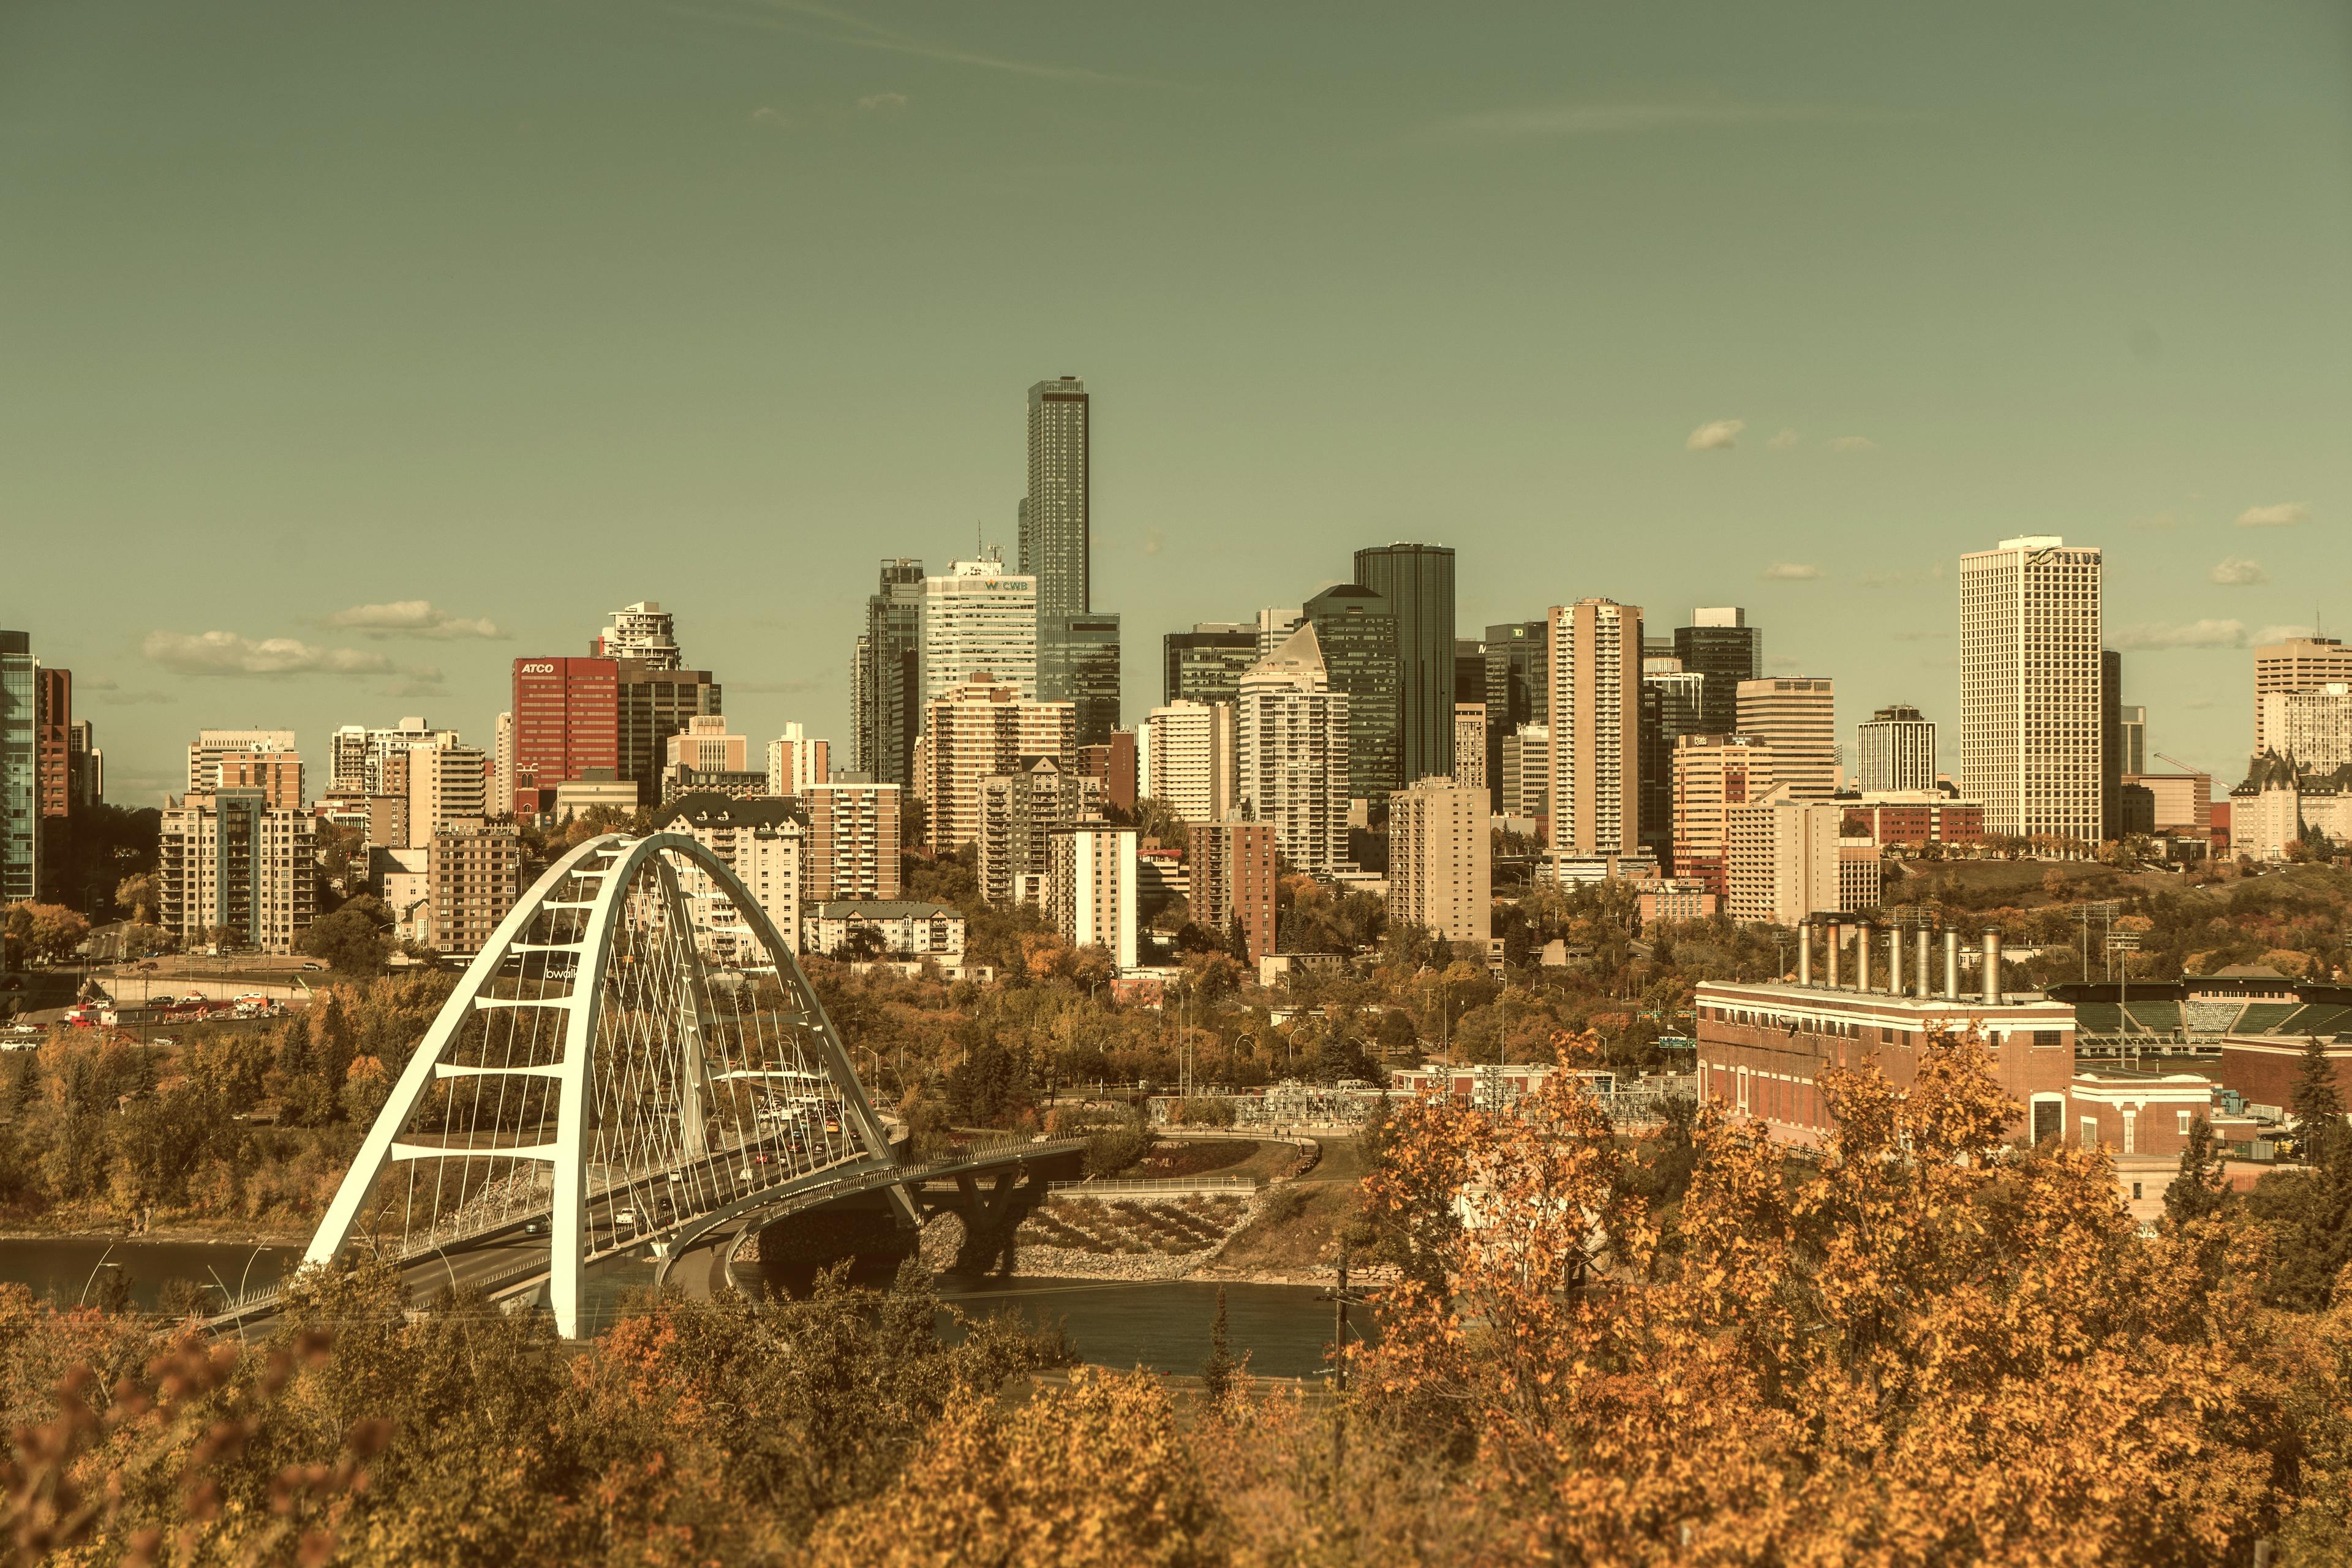 Edmonton's skyline on a clear day with a white bridge, the river and fall leaves in the foreground.